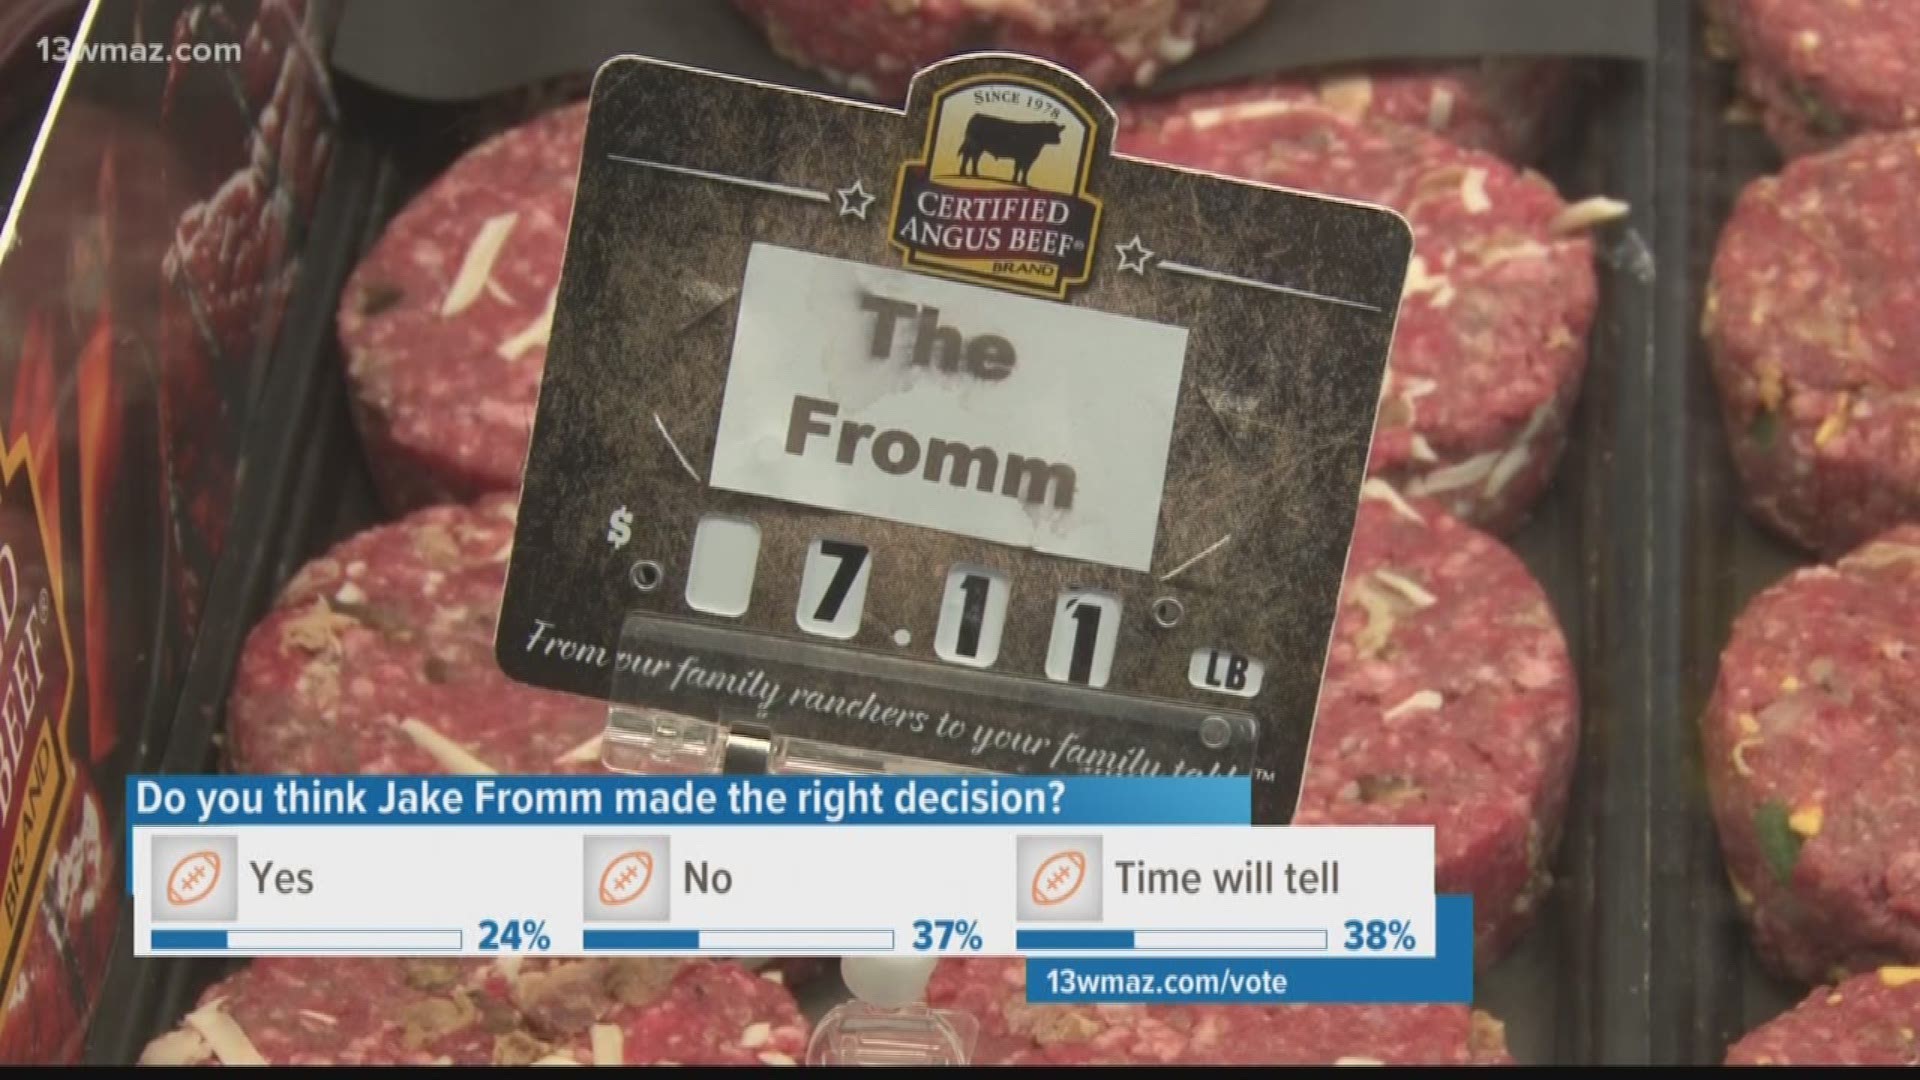 Pride from Warner Robins restaurants led to honoring Jake Fromm the best way they know how by putting his favorites on the menu.